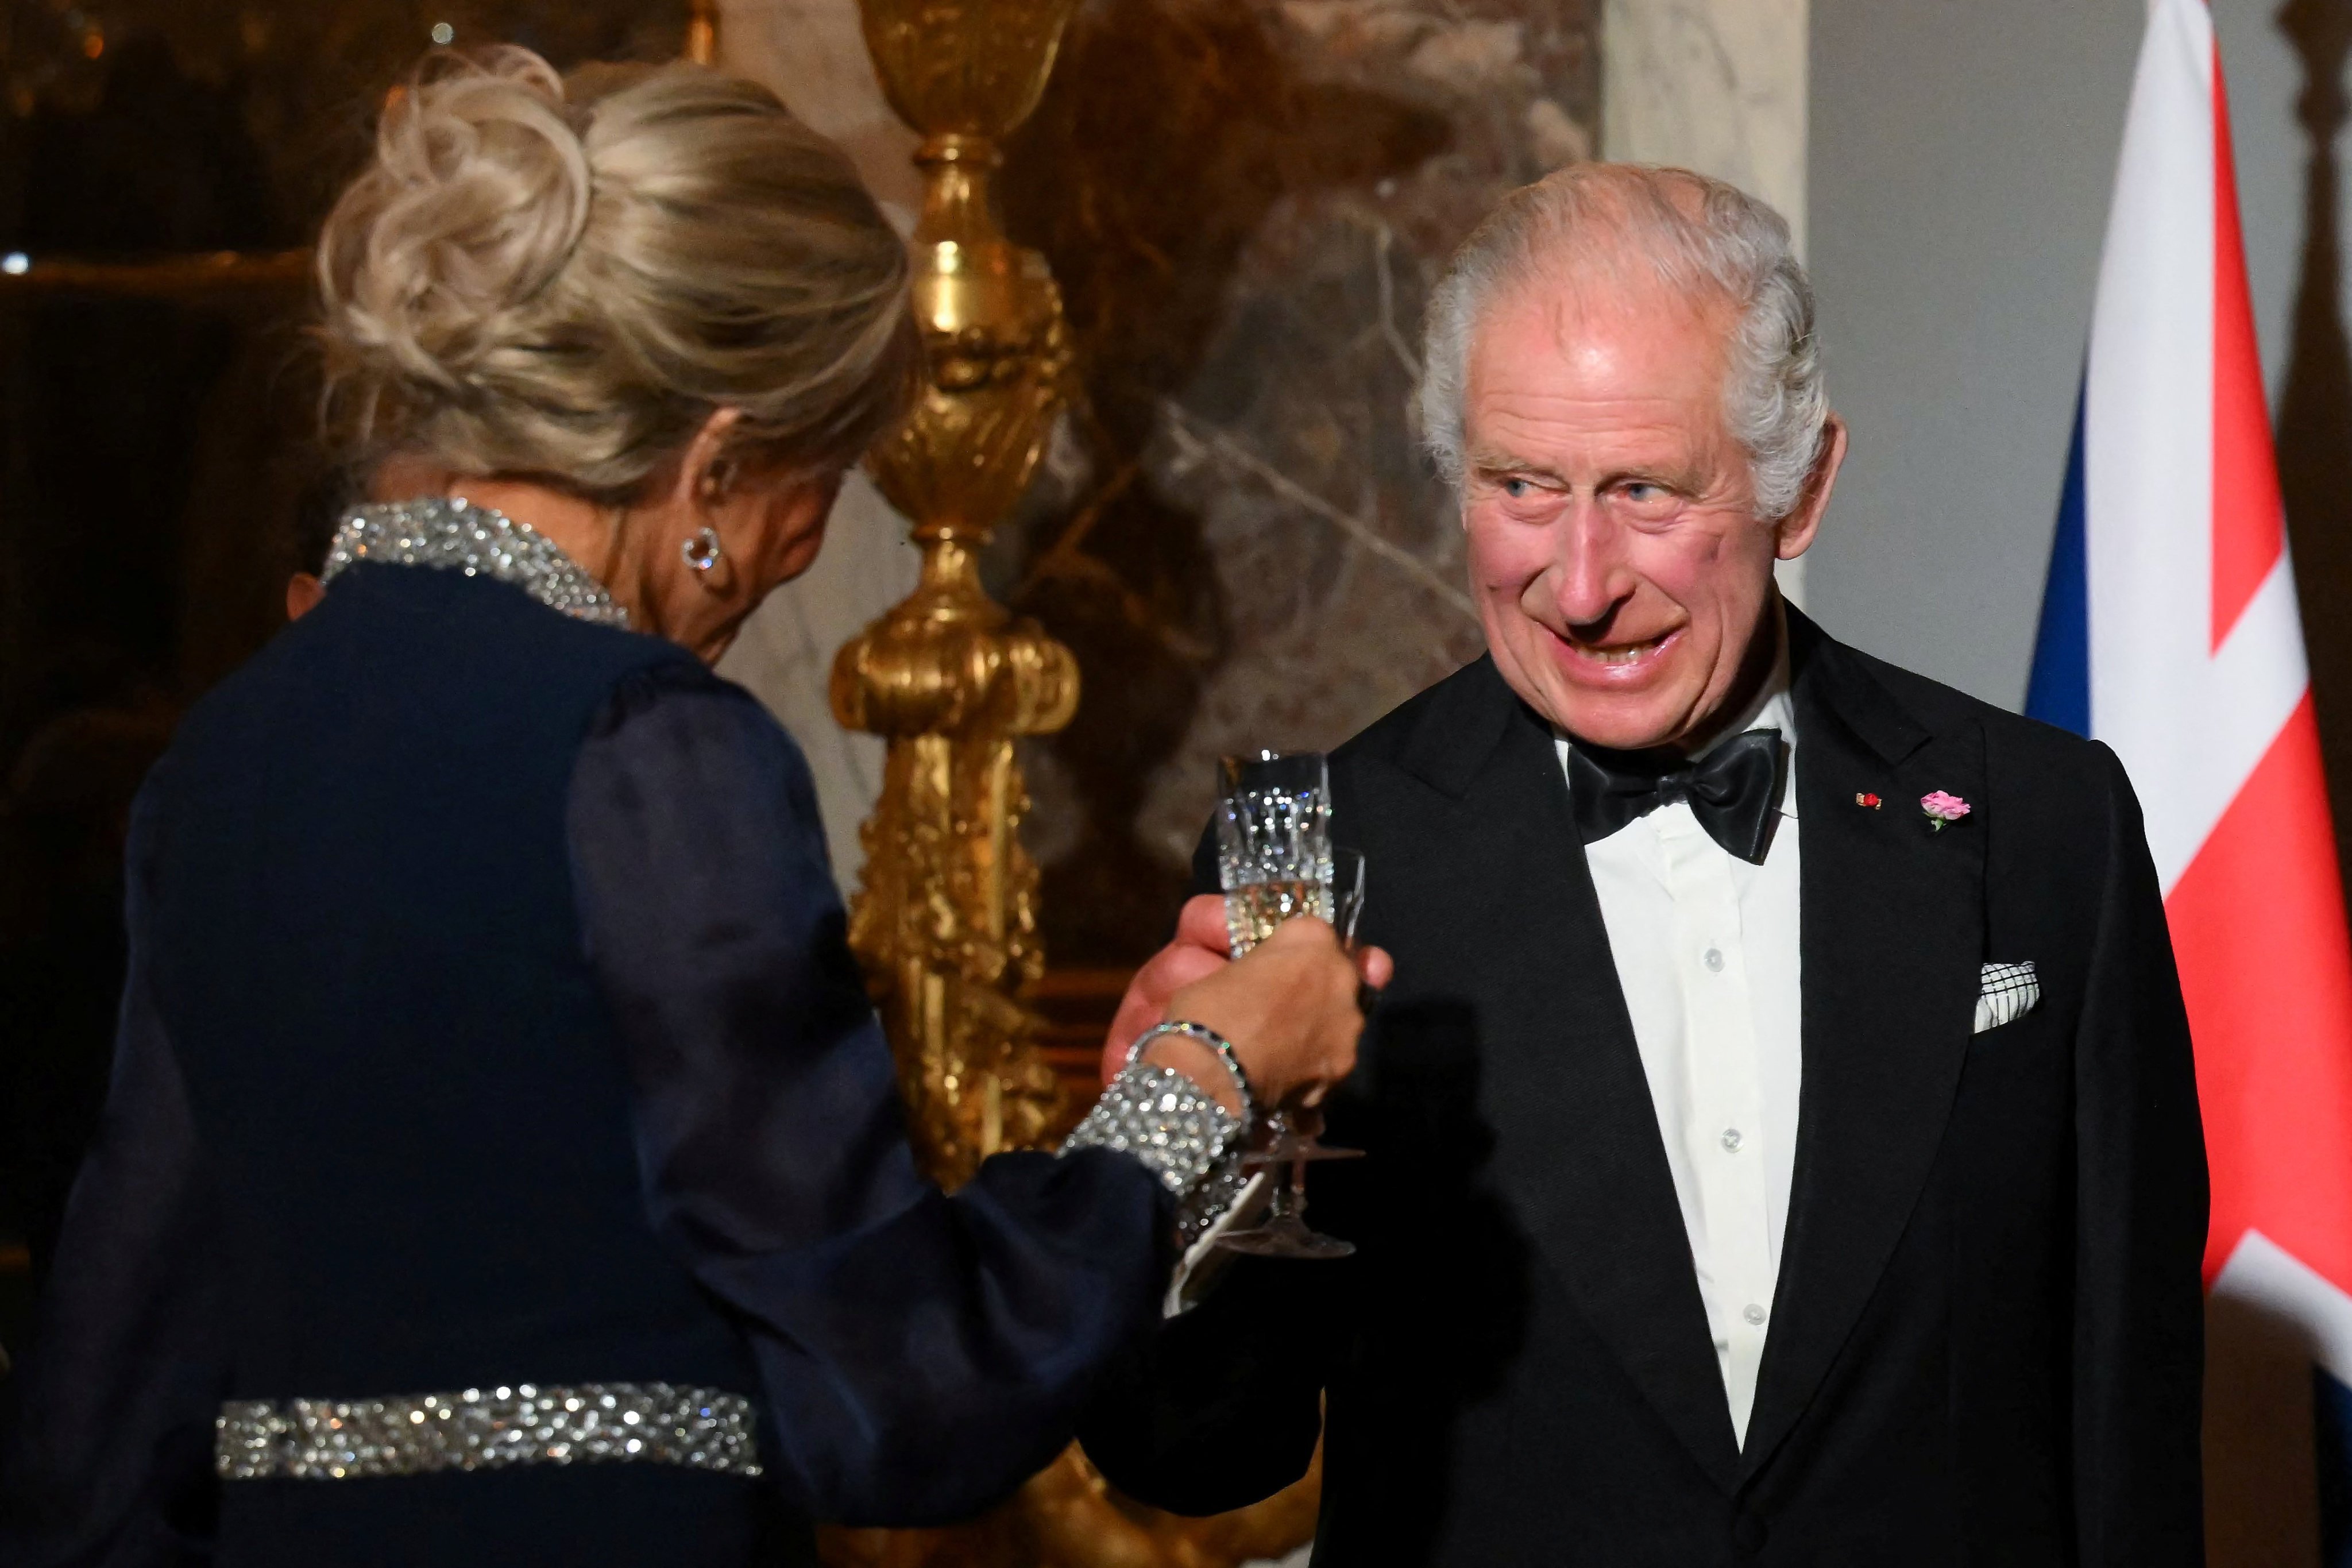 Britain’s King Charles toasts with French president’s wife, Brigitte Macron, during a state banquet at the Palace of Versailles on Wednesday. Photo: Reuters